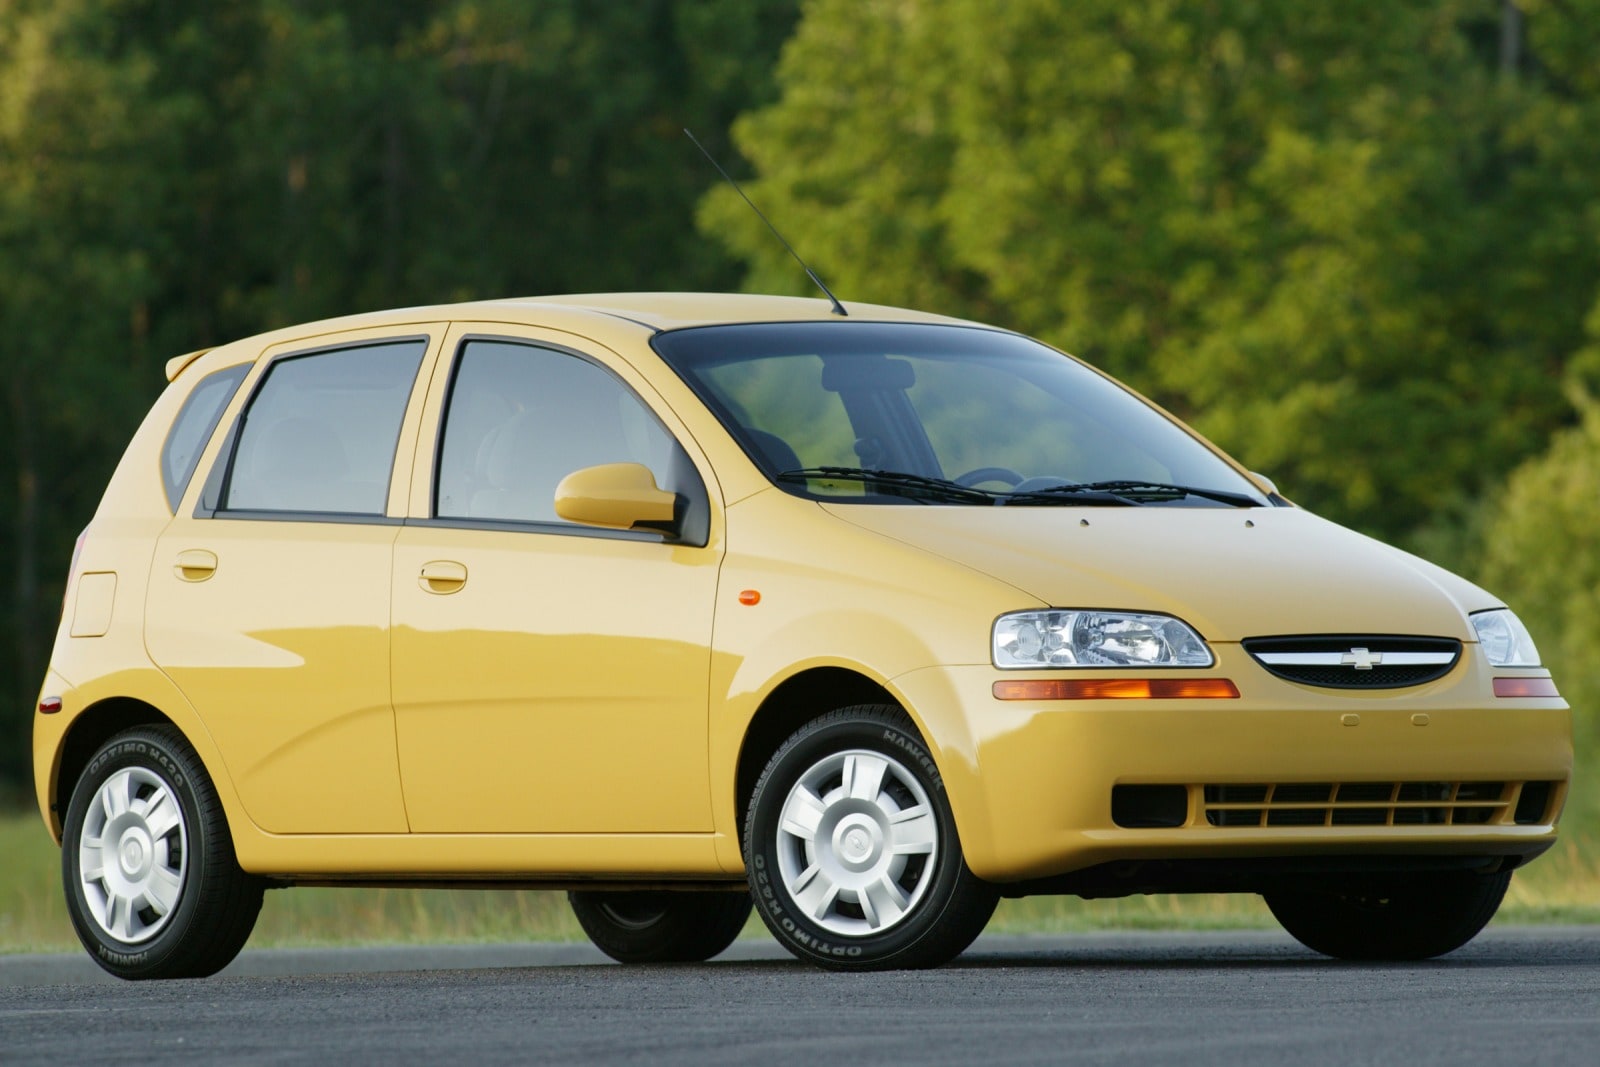 Used 2007 Chevrolet Aveo Hatchback Review | Edmunds